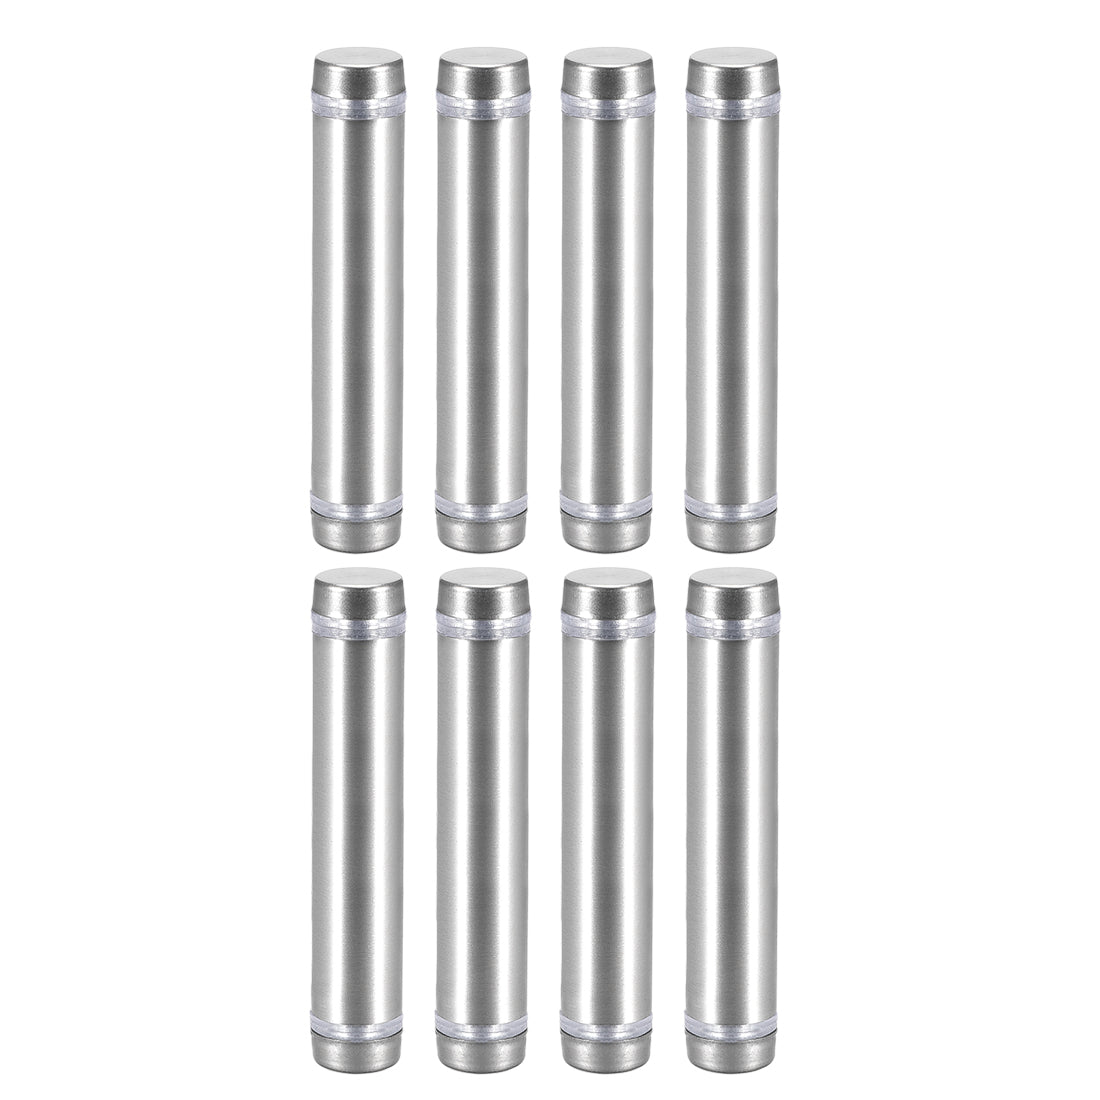 uxcell Uxcell Glass Standoff Double Head Stainless Steel Standoff Holder 12mm x 64mm 8 Pcs